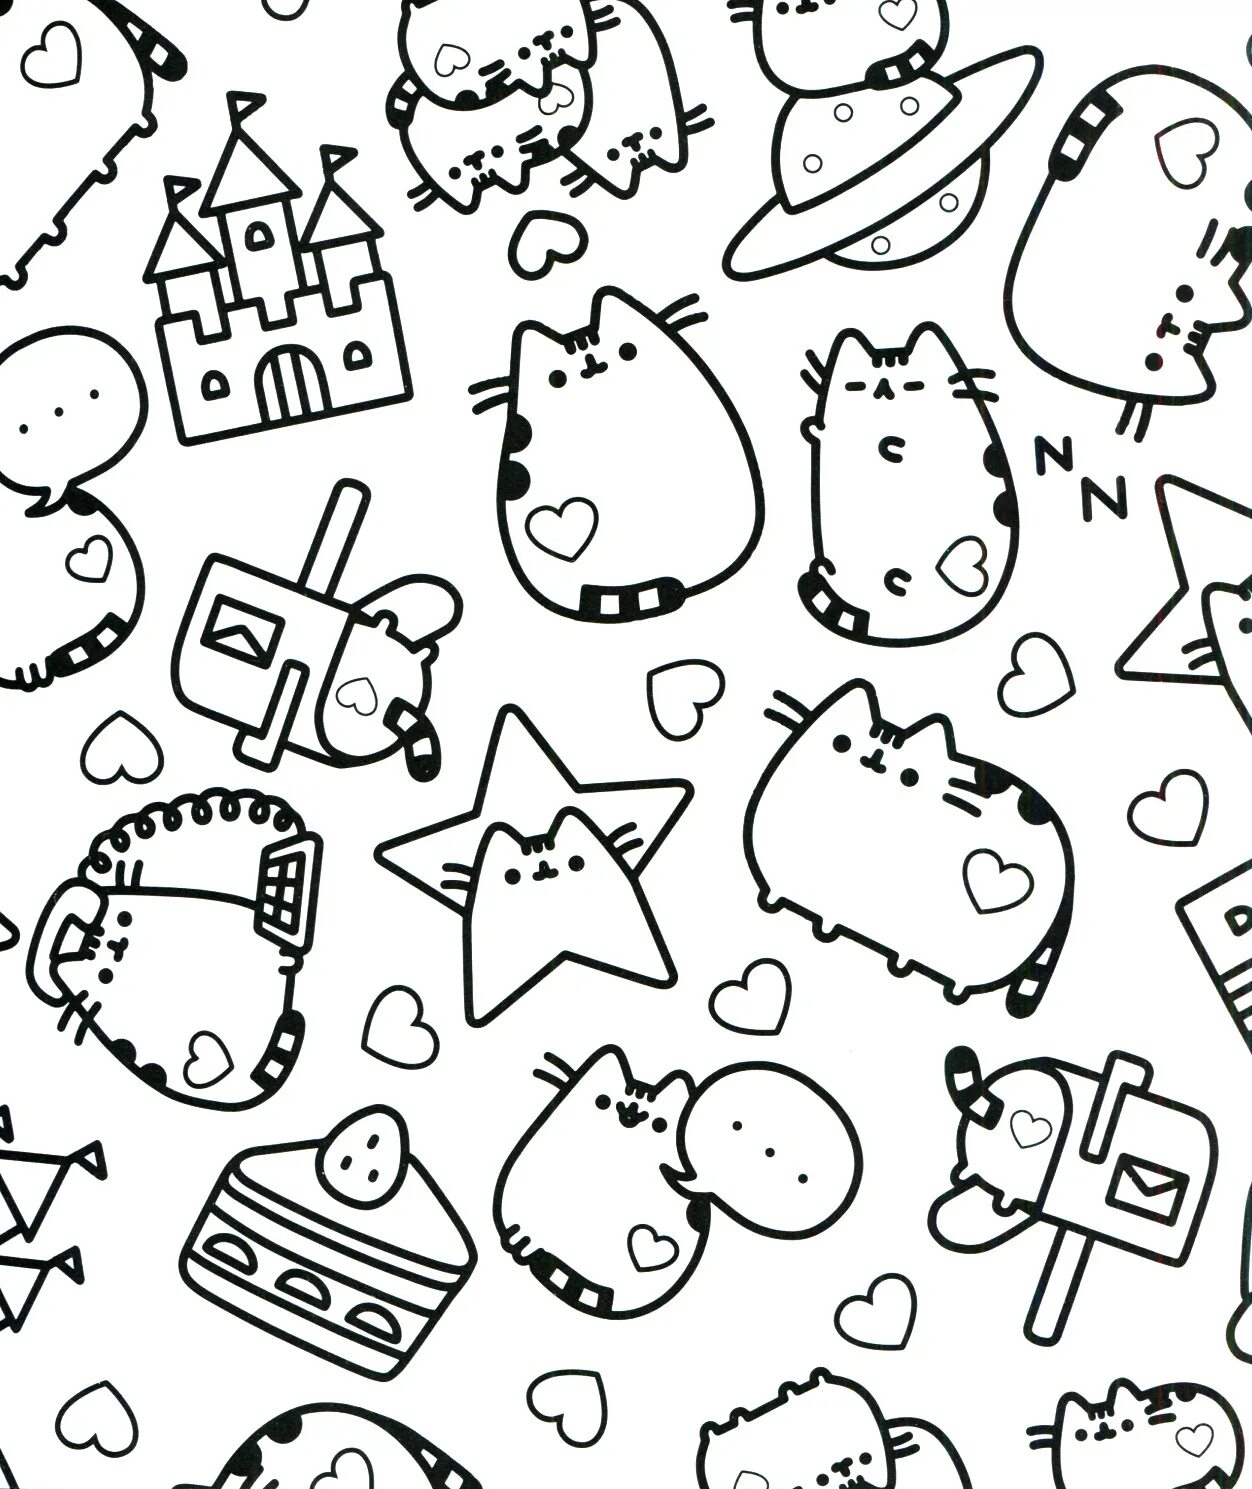 Playable pusheen cat coloring page